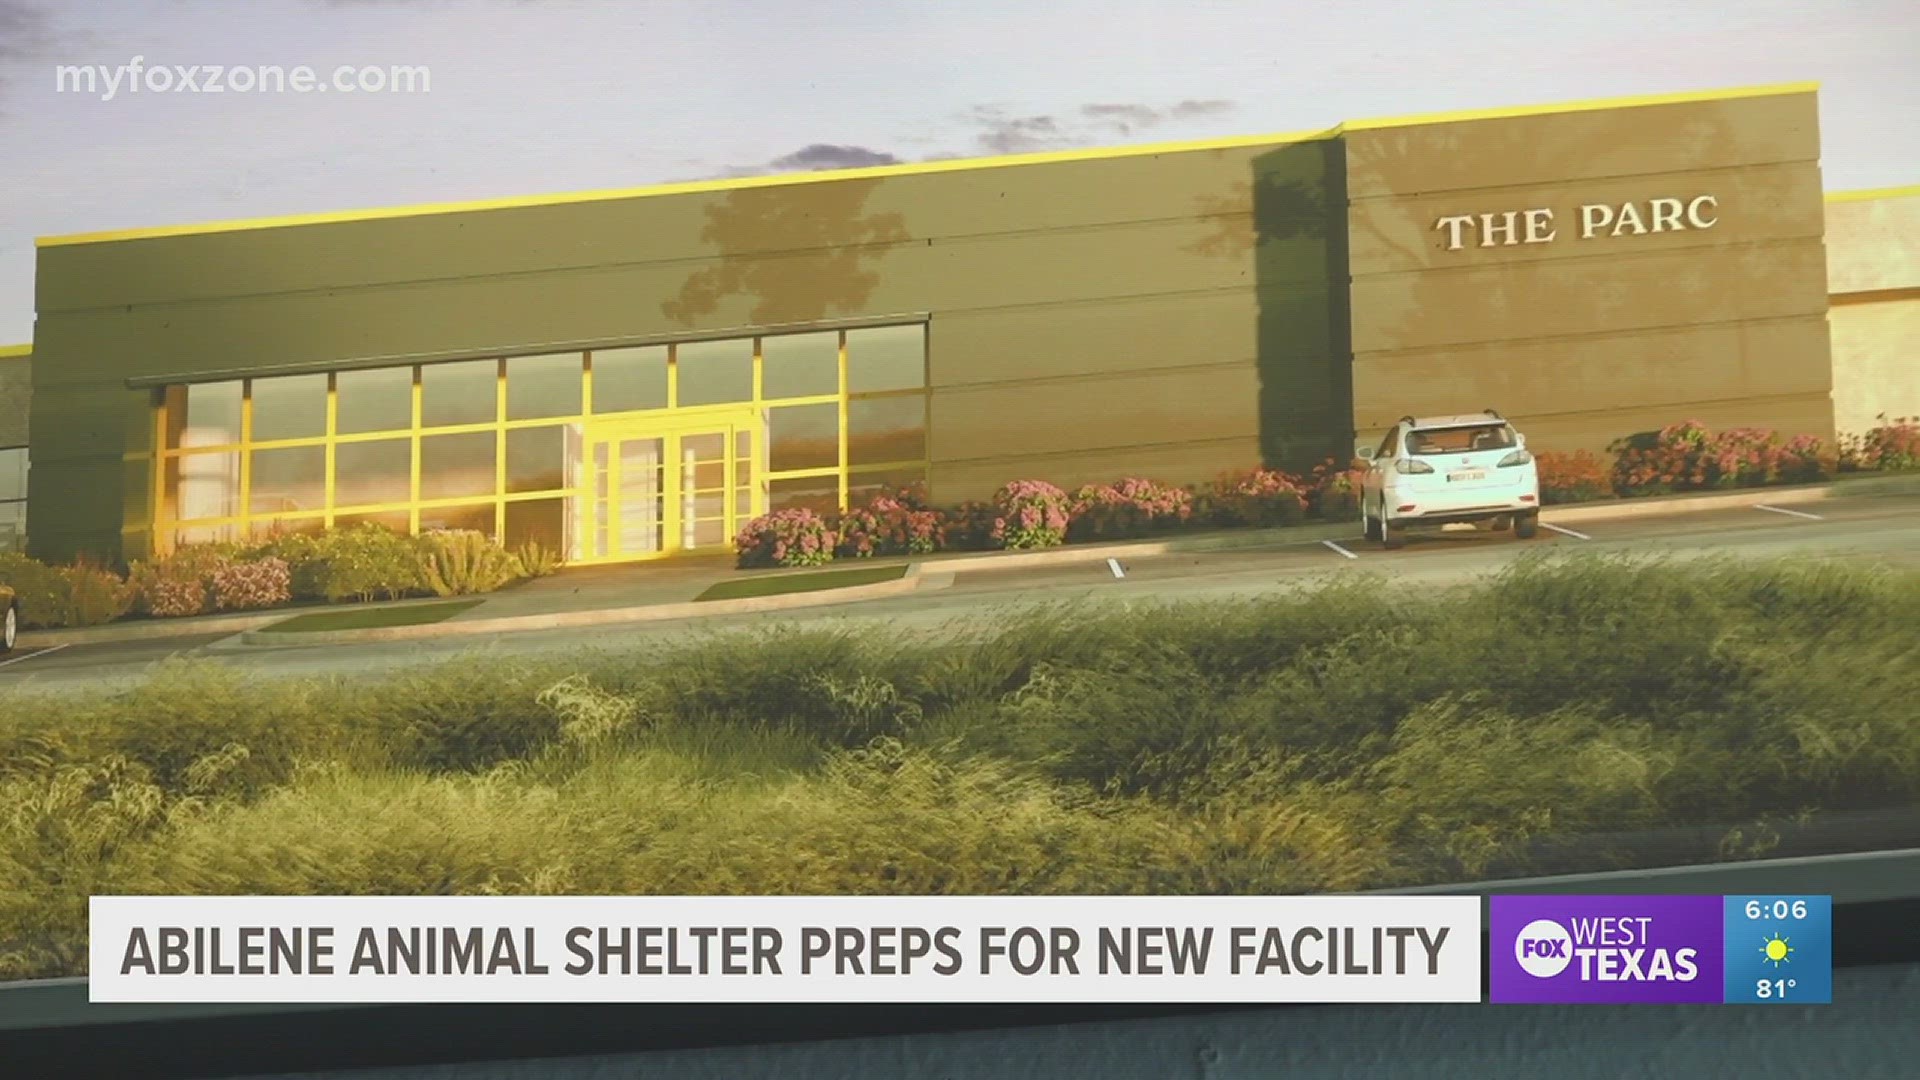 The All Kinds Animal Initiative looks to welcome a brand new facility to provide premium services for those they shelter.